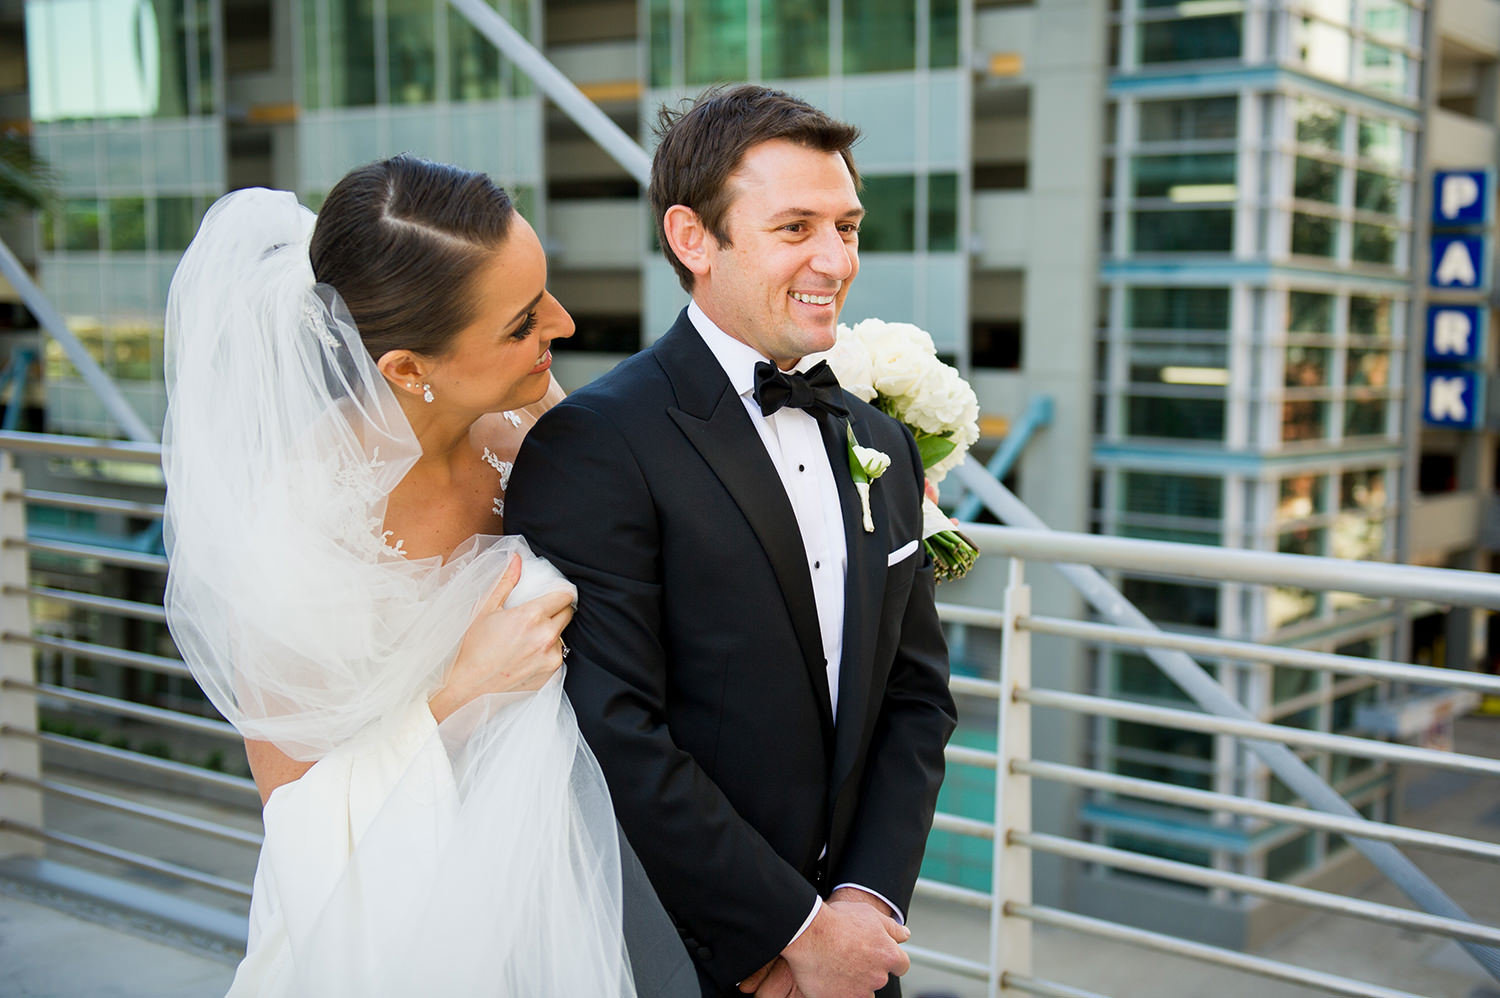 First look for the groom and bride at the Omni Hotel